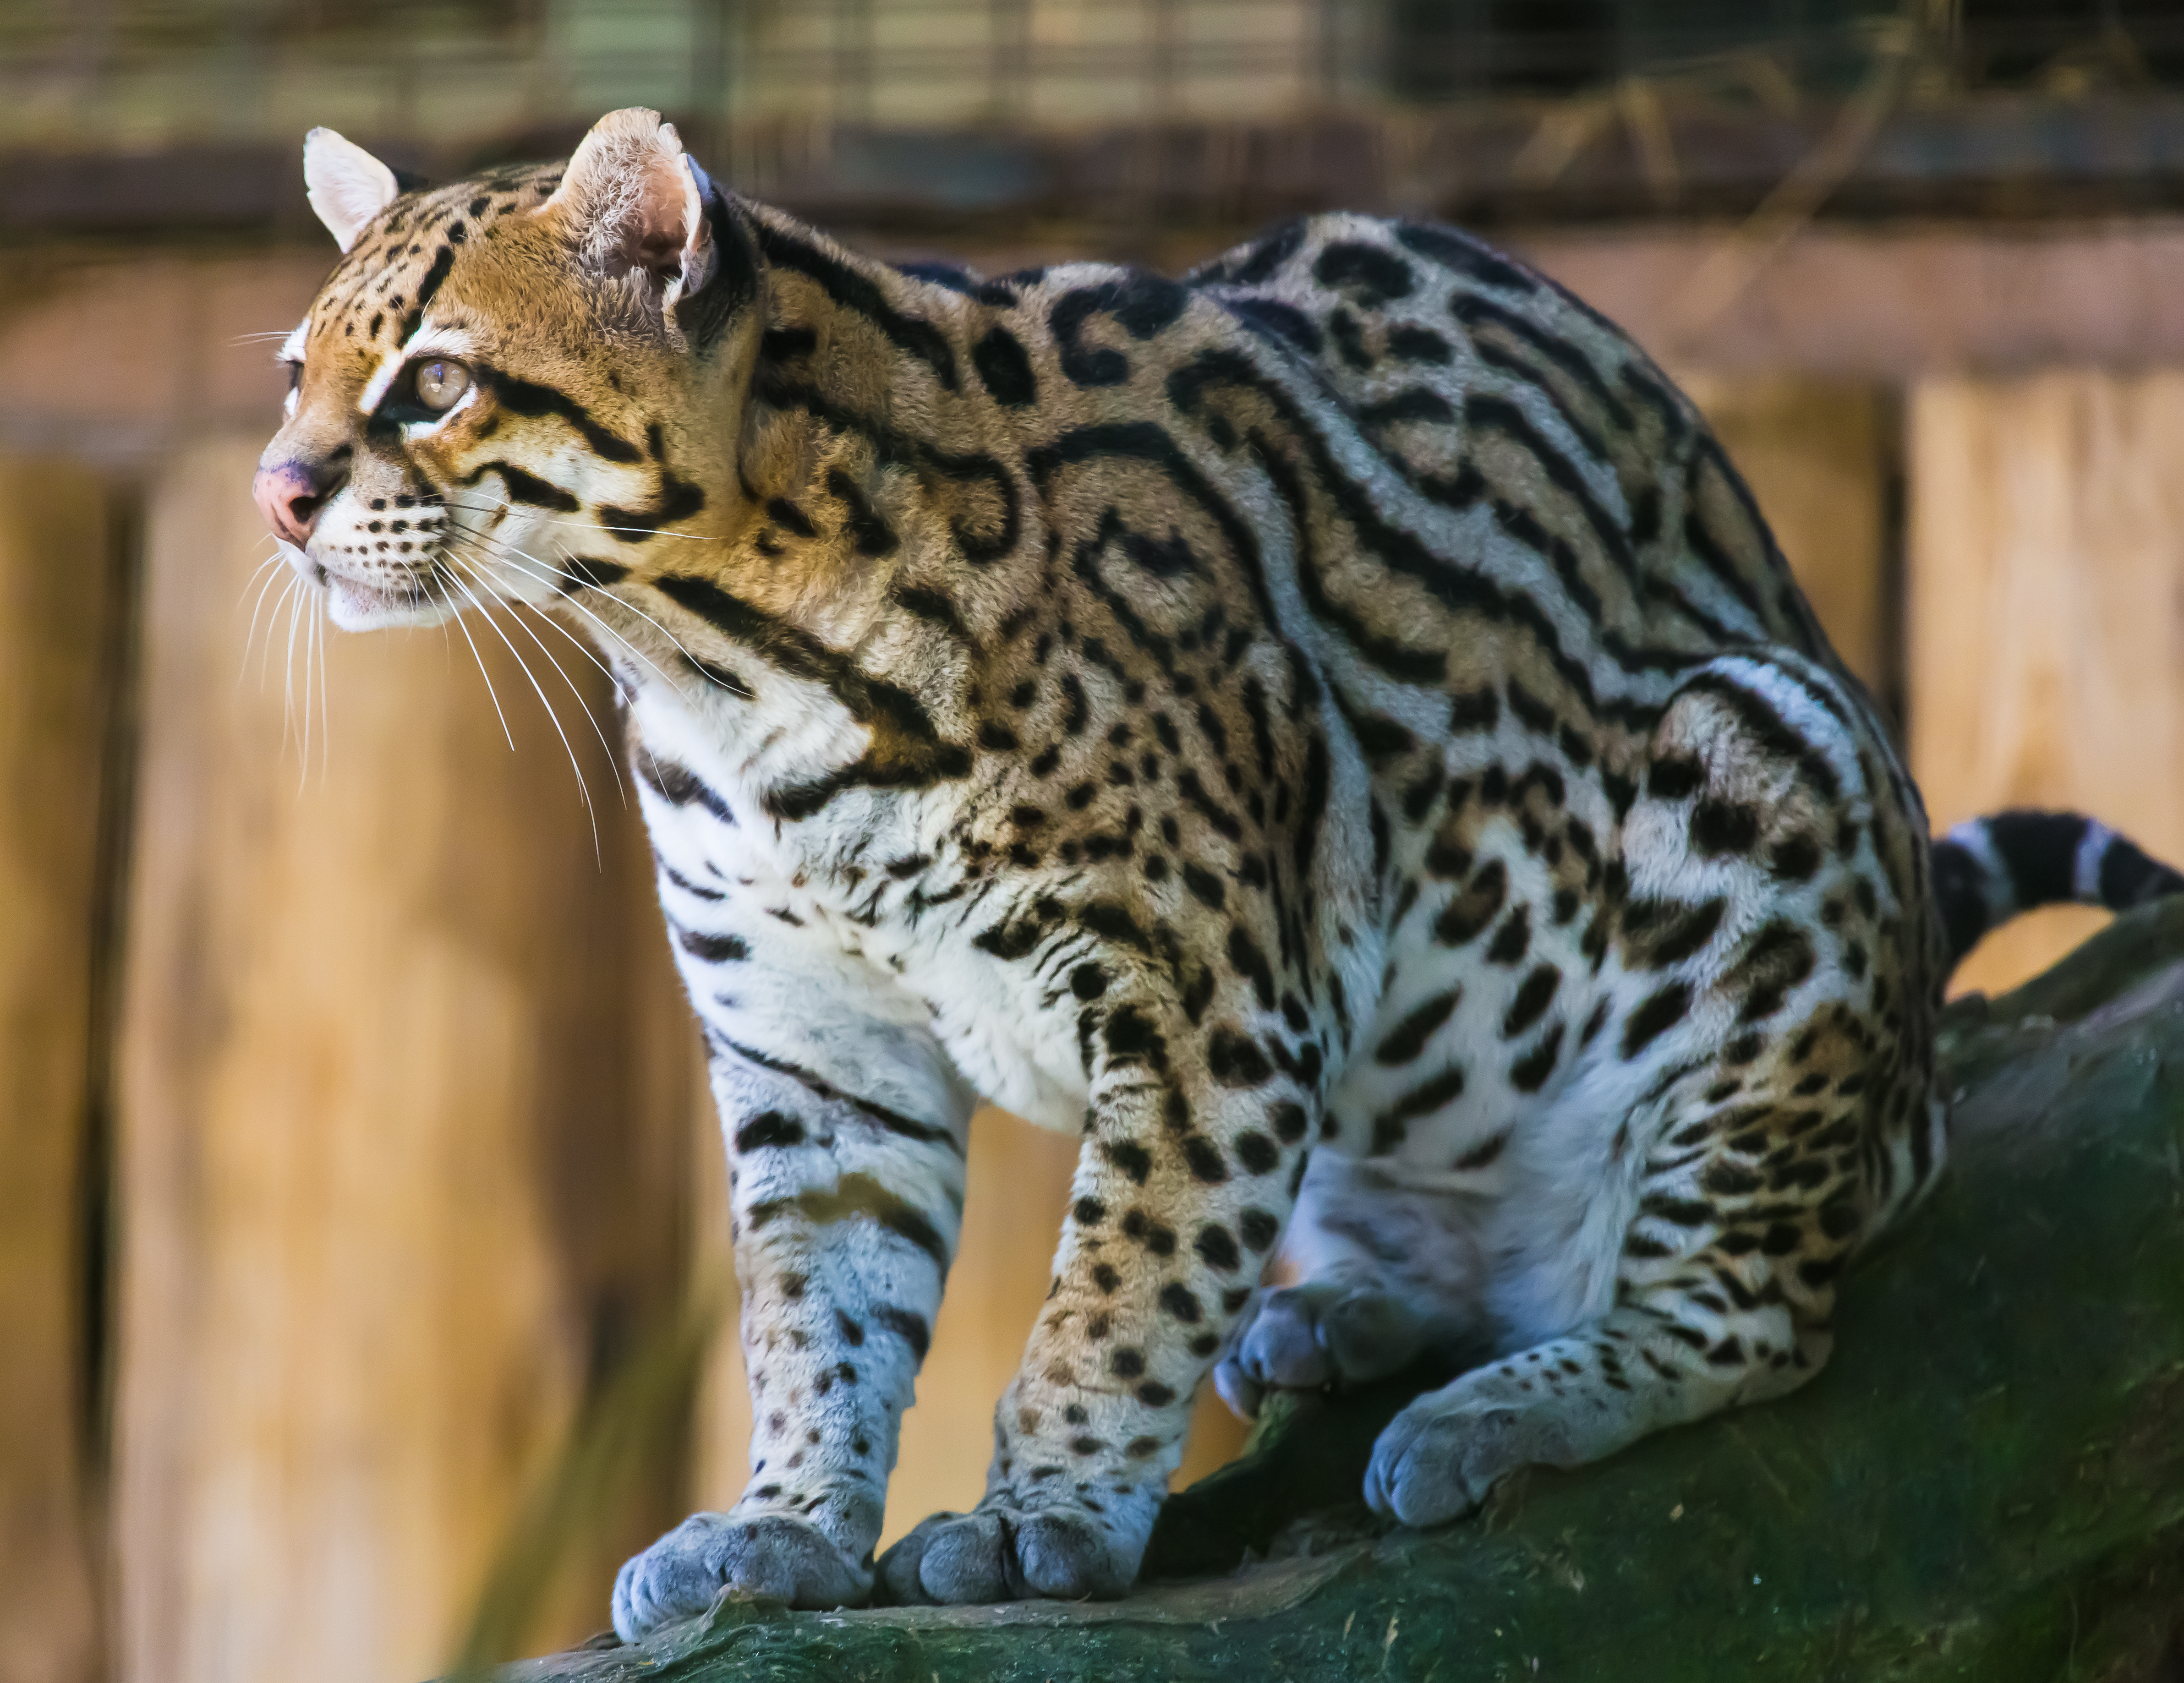 What features do ocelots have?